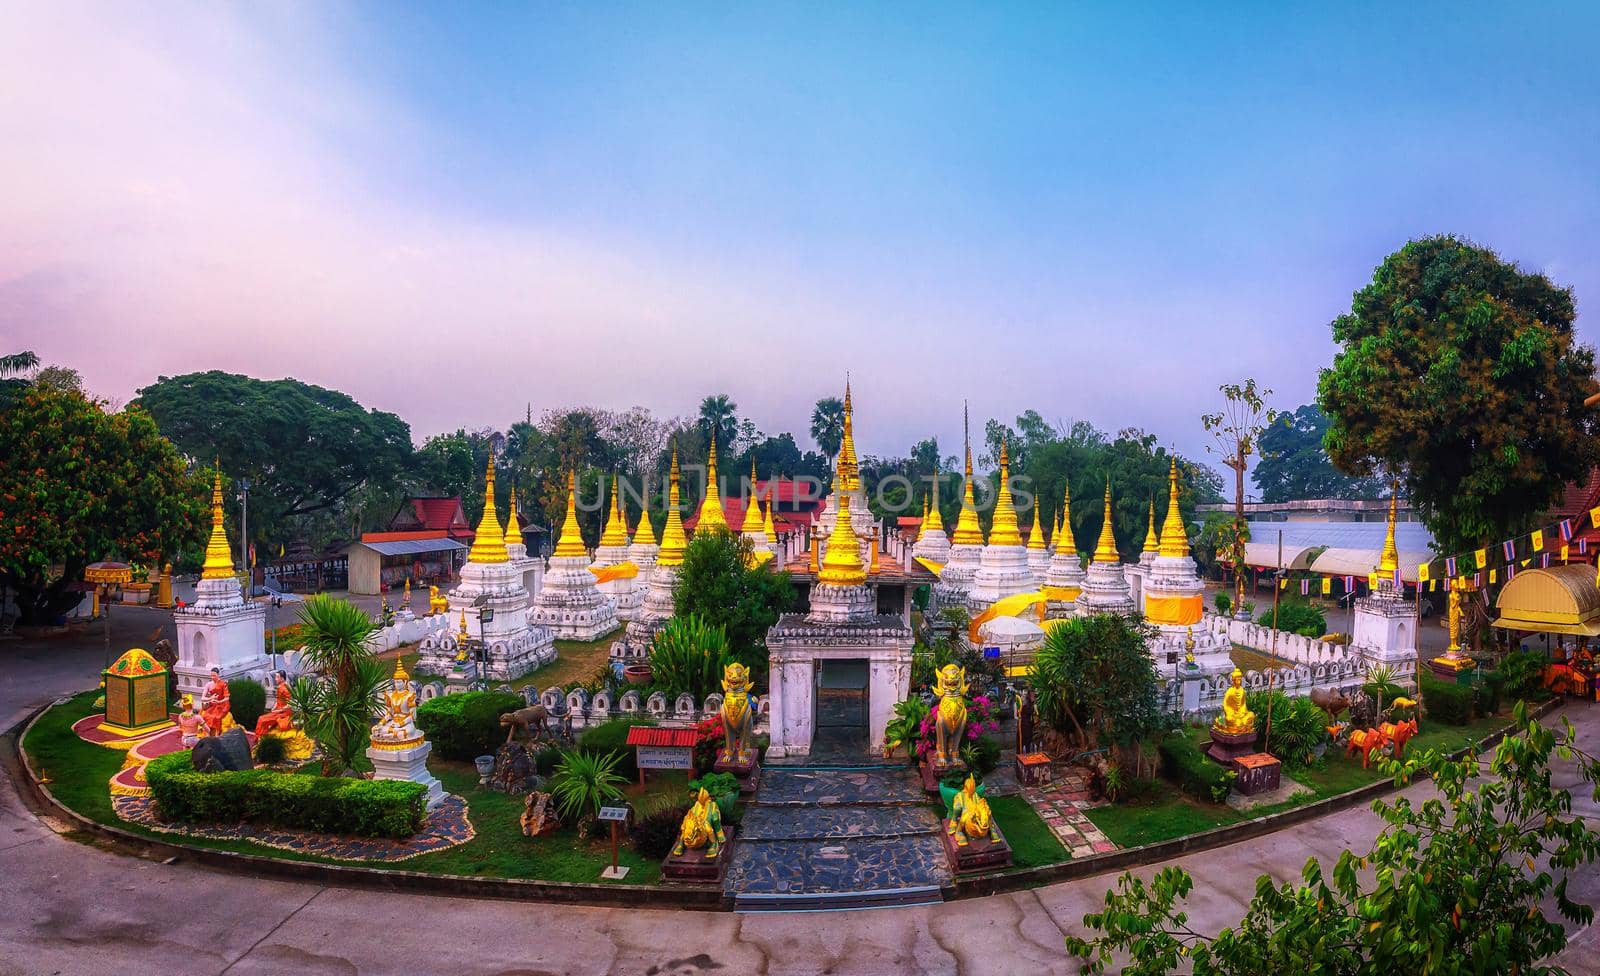 Twenty pagodas temple is a Buddhist temple in Lampang province, Thailand by NuwatPhoto